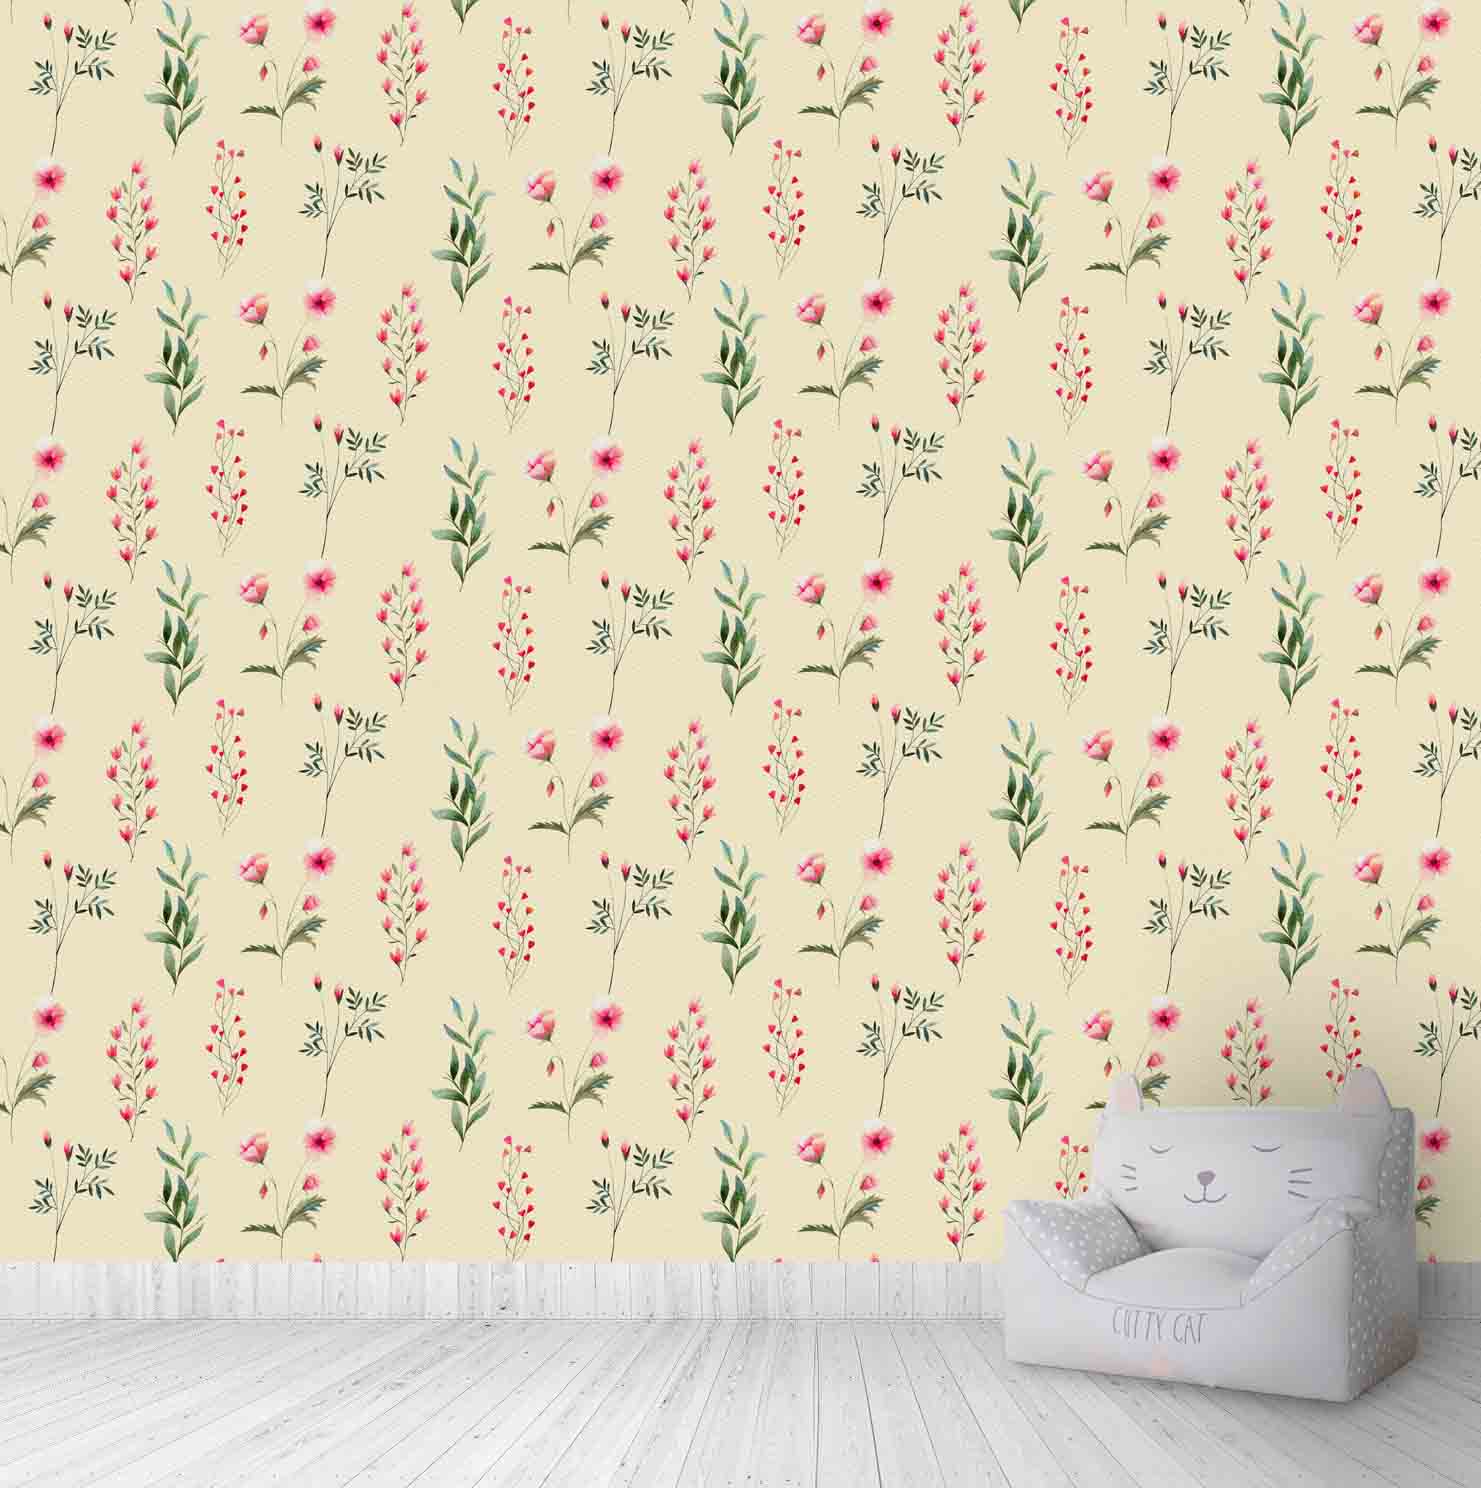 Floral Repeat Pattern For Bedroom Wallpaper